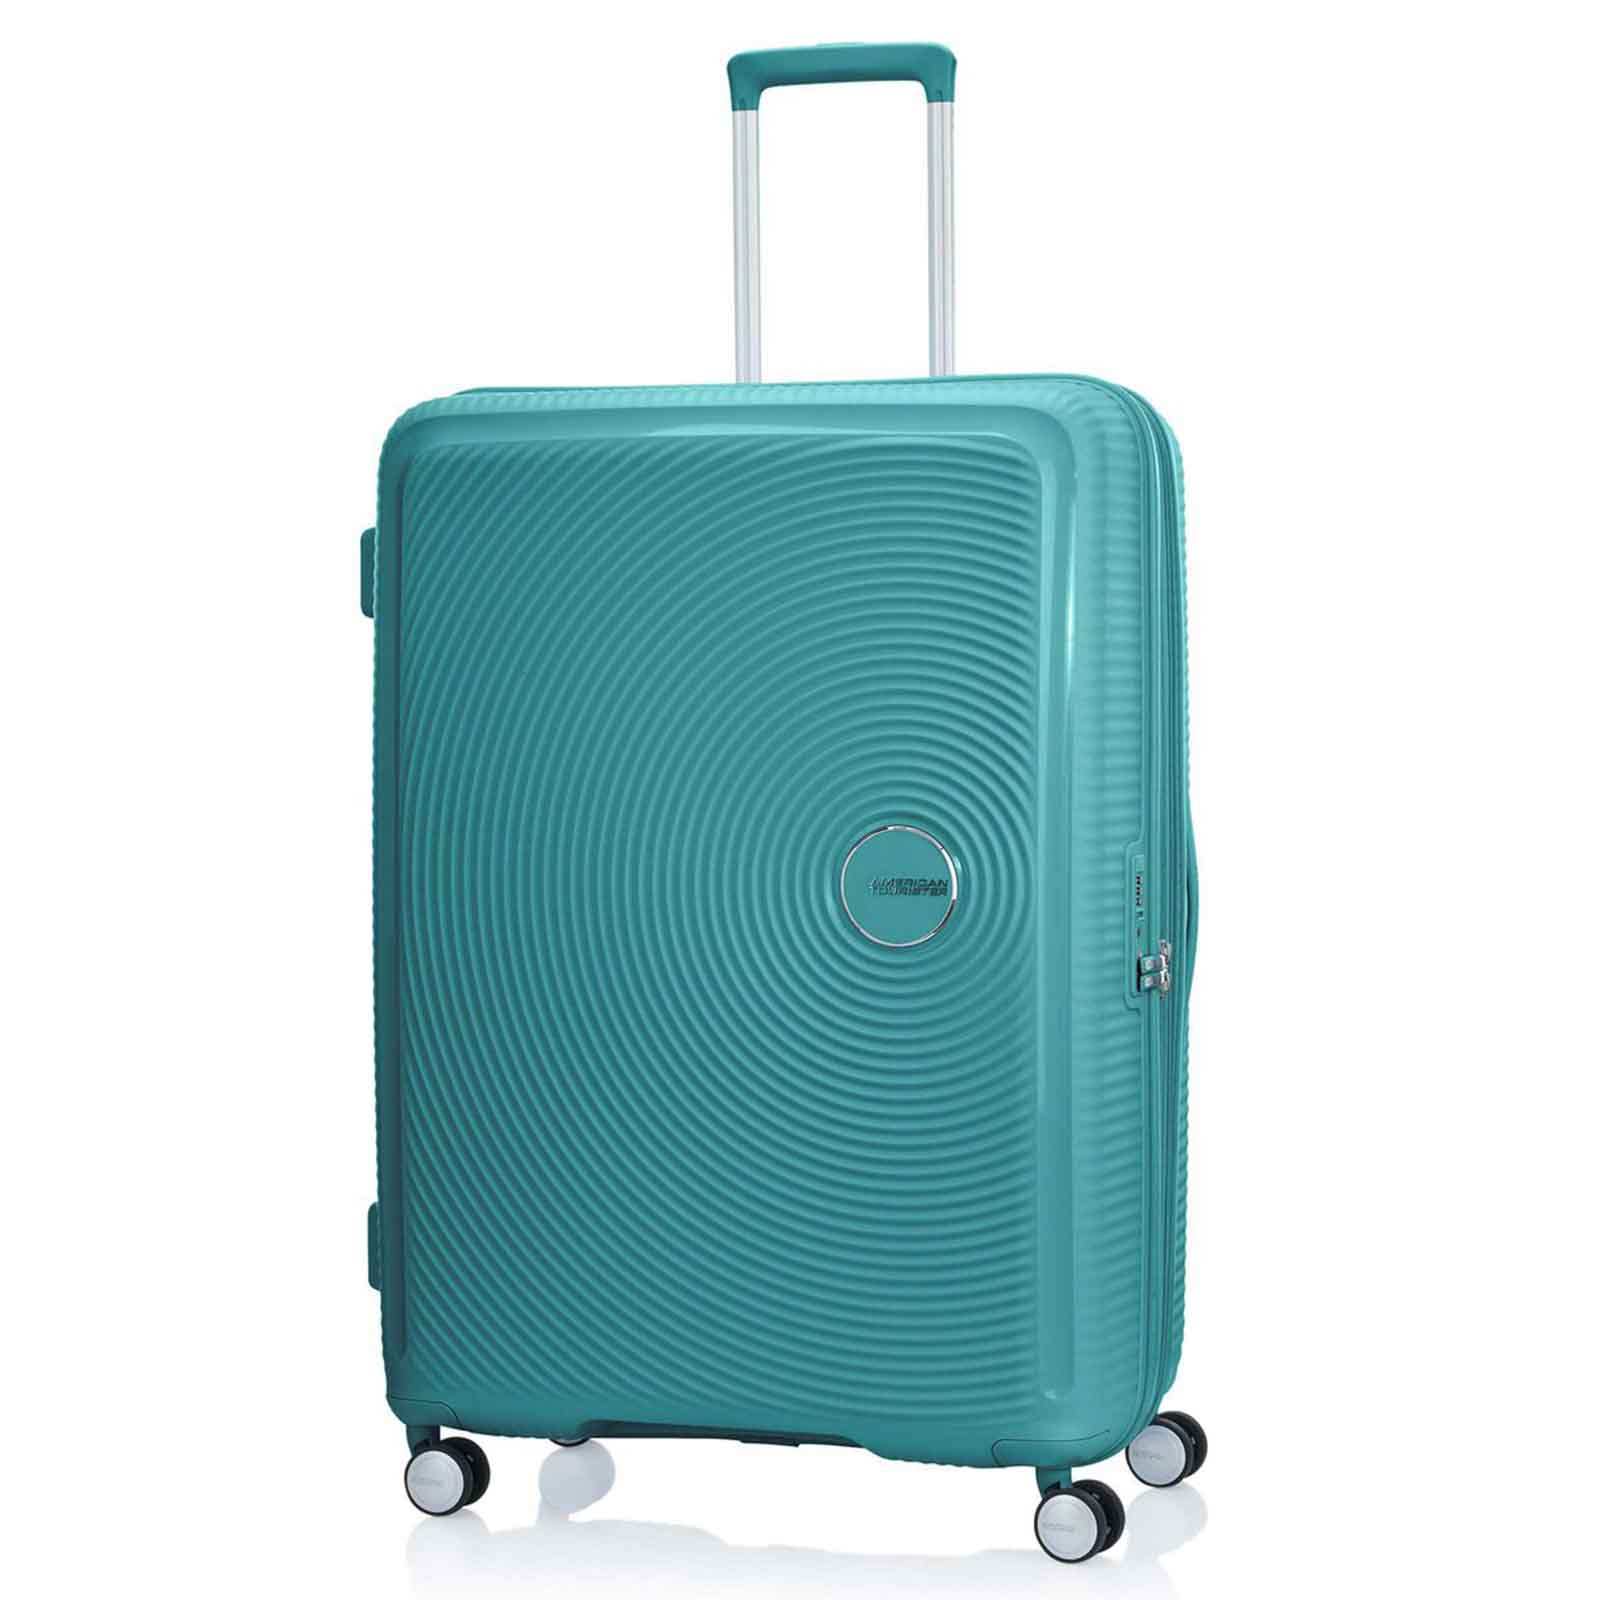 American-Tourister-Curio-2-80cm-Suitcase-Jade-Green-Front-Angle